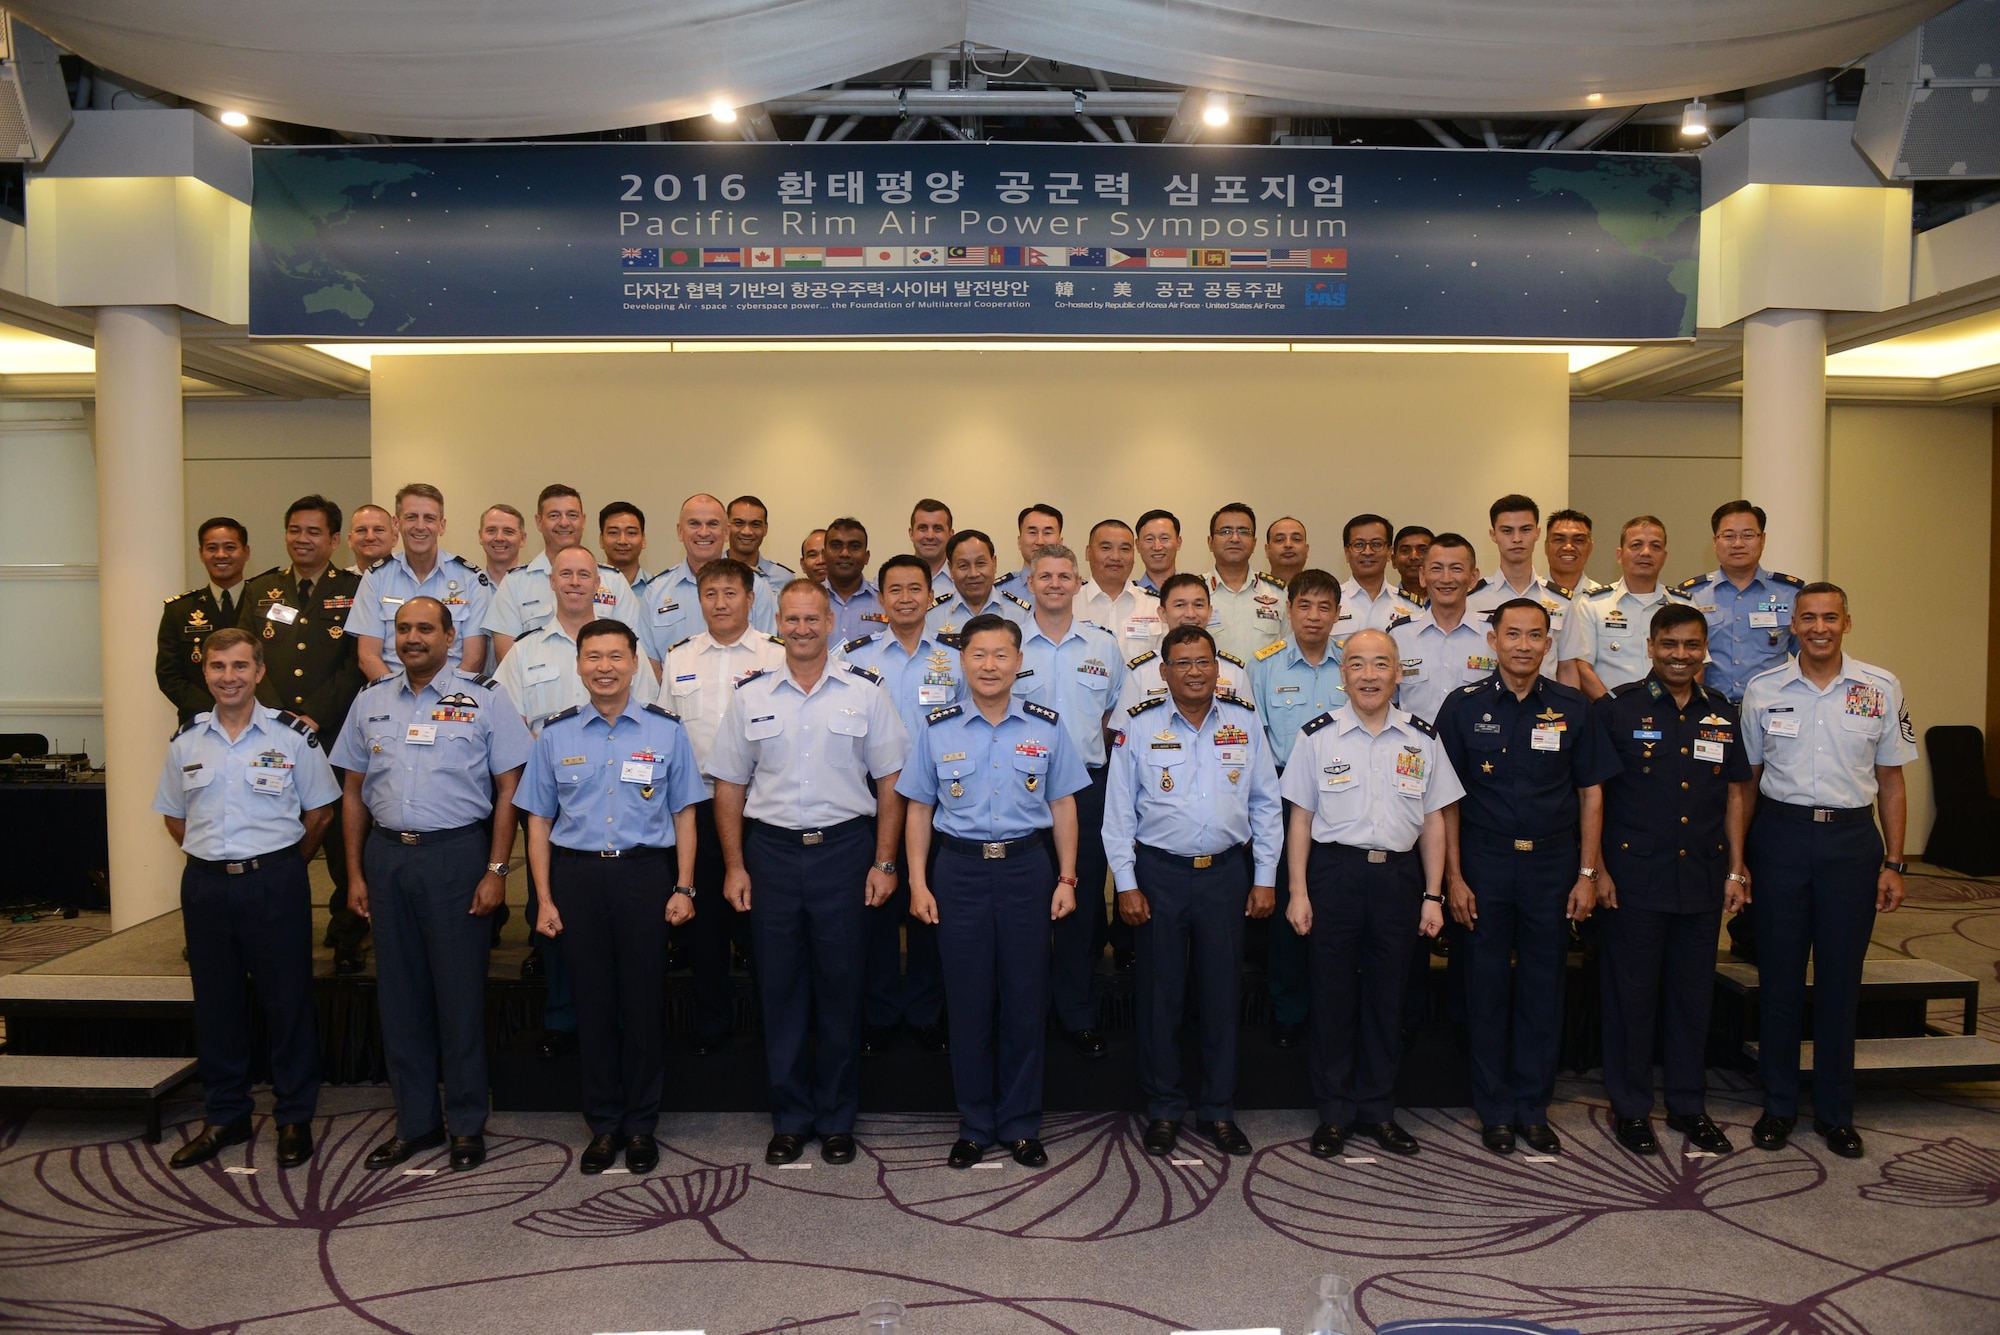 Pacific Rim (PACRIM) Airpower Symposium participants pose for a group photo in Seoul, Republic of Korea. The PACRIM Airpower Symposium, held Sept. 5-9, builds and improves multilateral relationships among air forces in the Indo-Asia-Pacific region. Bringing regional partners together in forums such as the PACRIM Airpower Symposium to address issues of mutual concern enhance the ability to respond to crises that threaten the peace and stability of the Pacific region. (Courtesy photo)